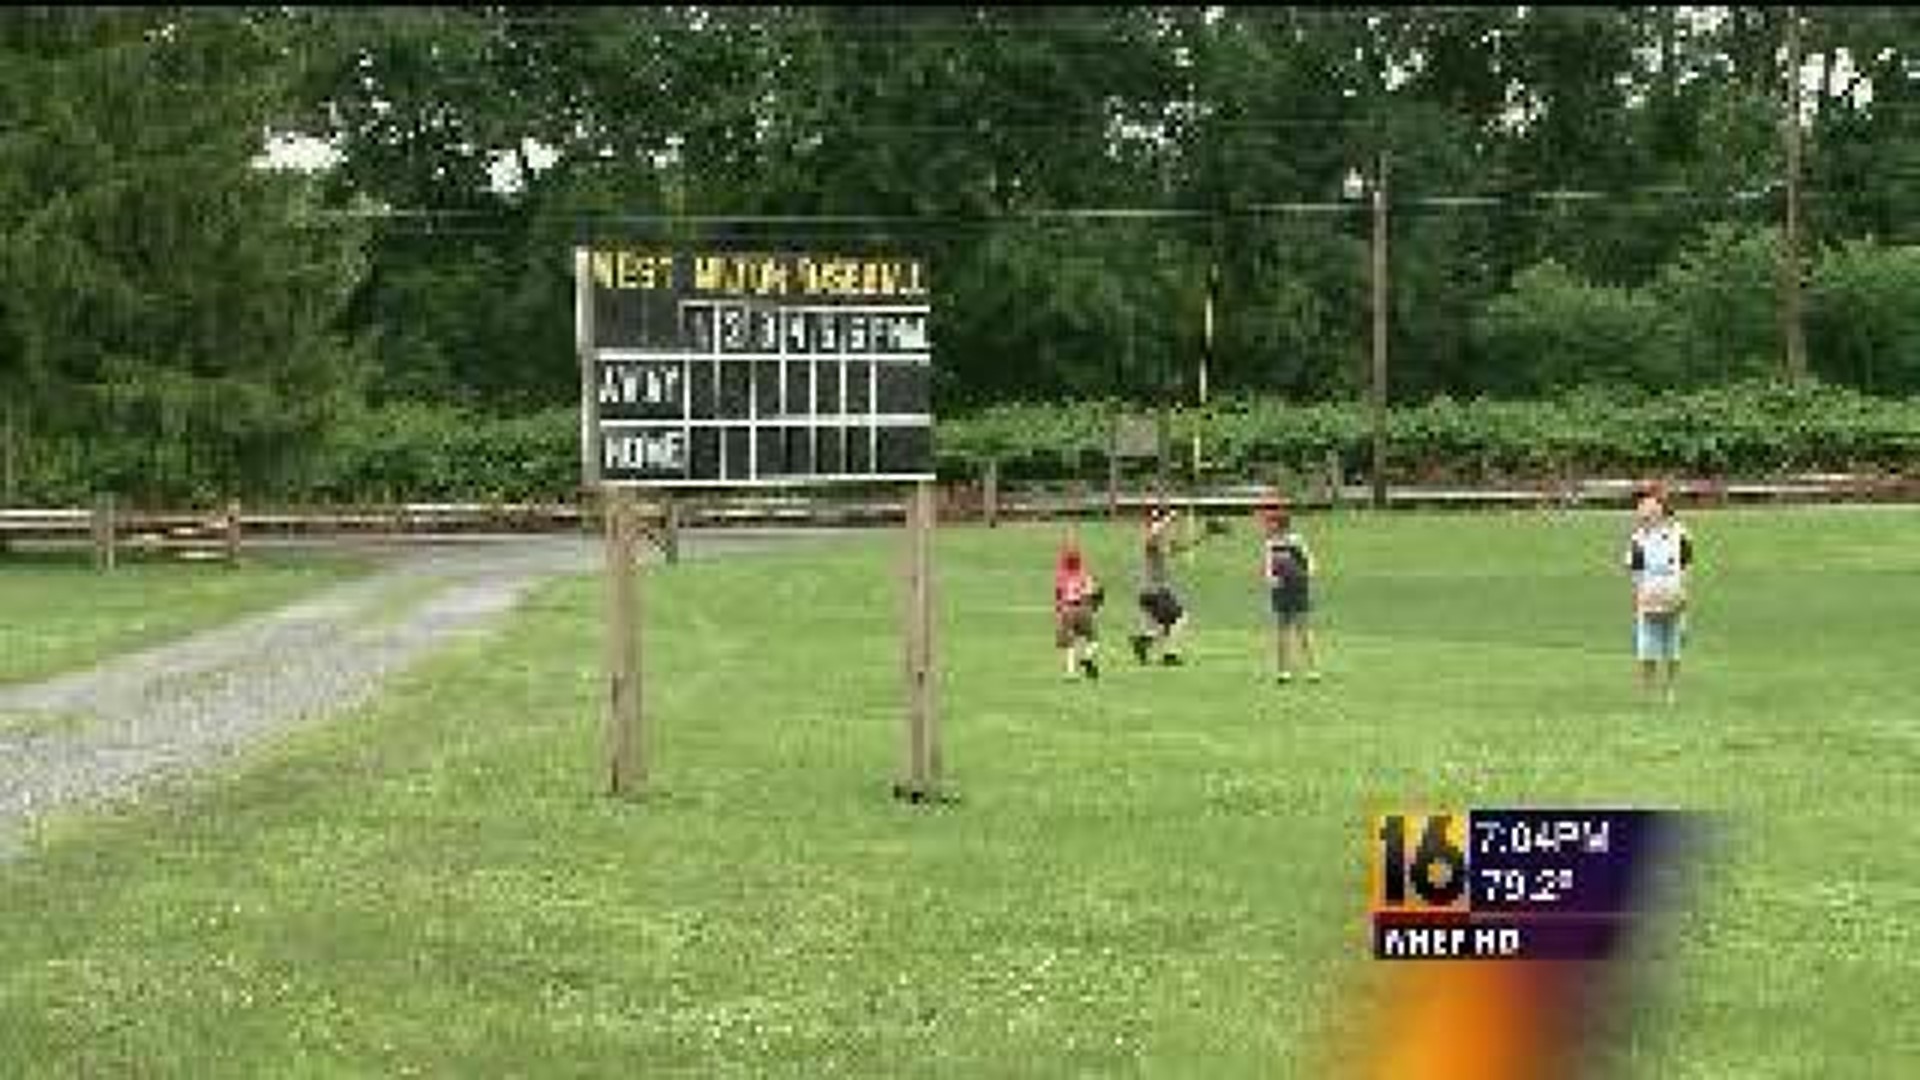 Thieves Steal from Midget Baseball League